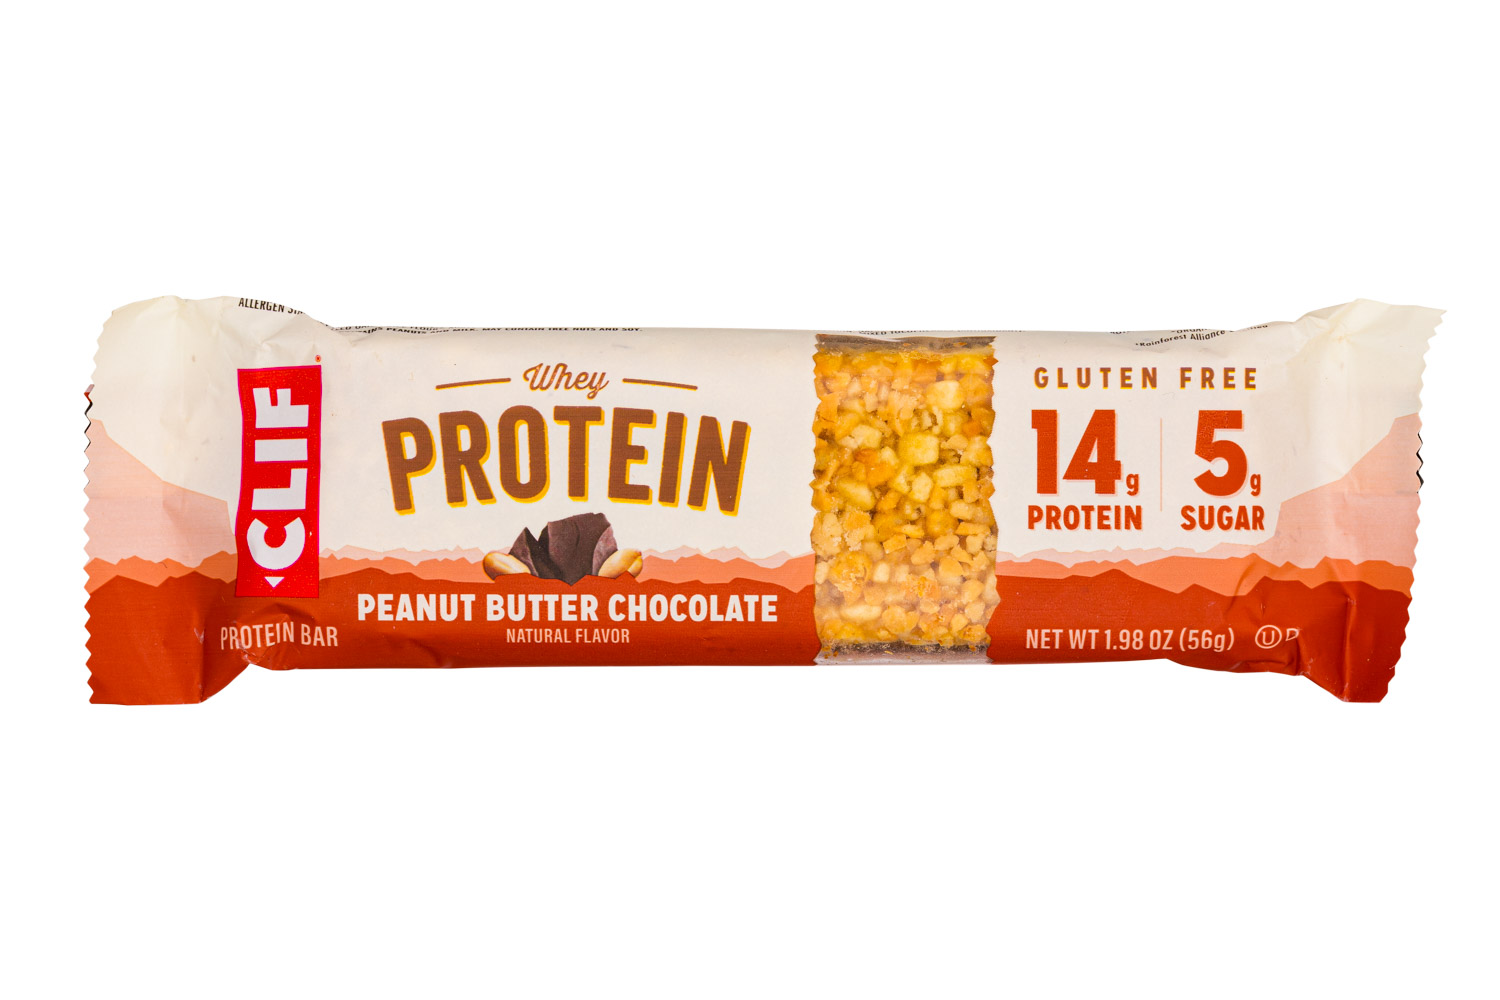 Peanut Butter Chocolate - Protein Bars